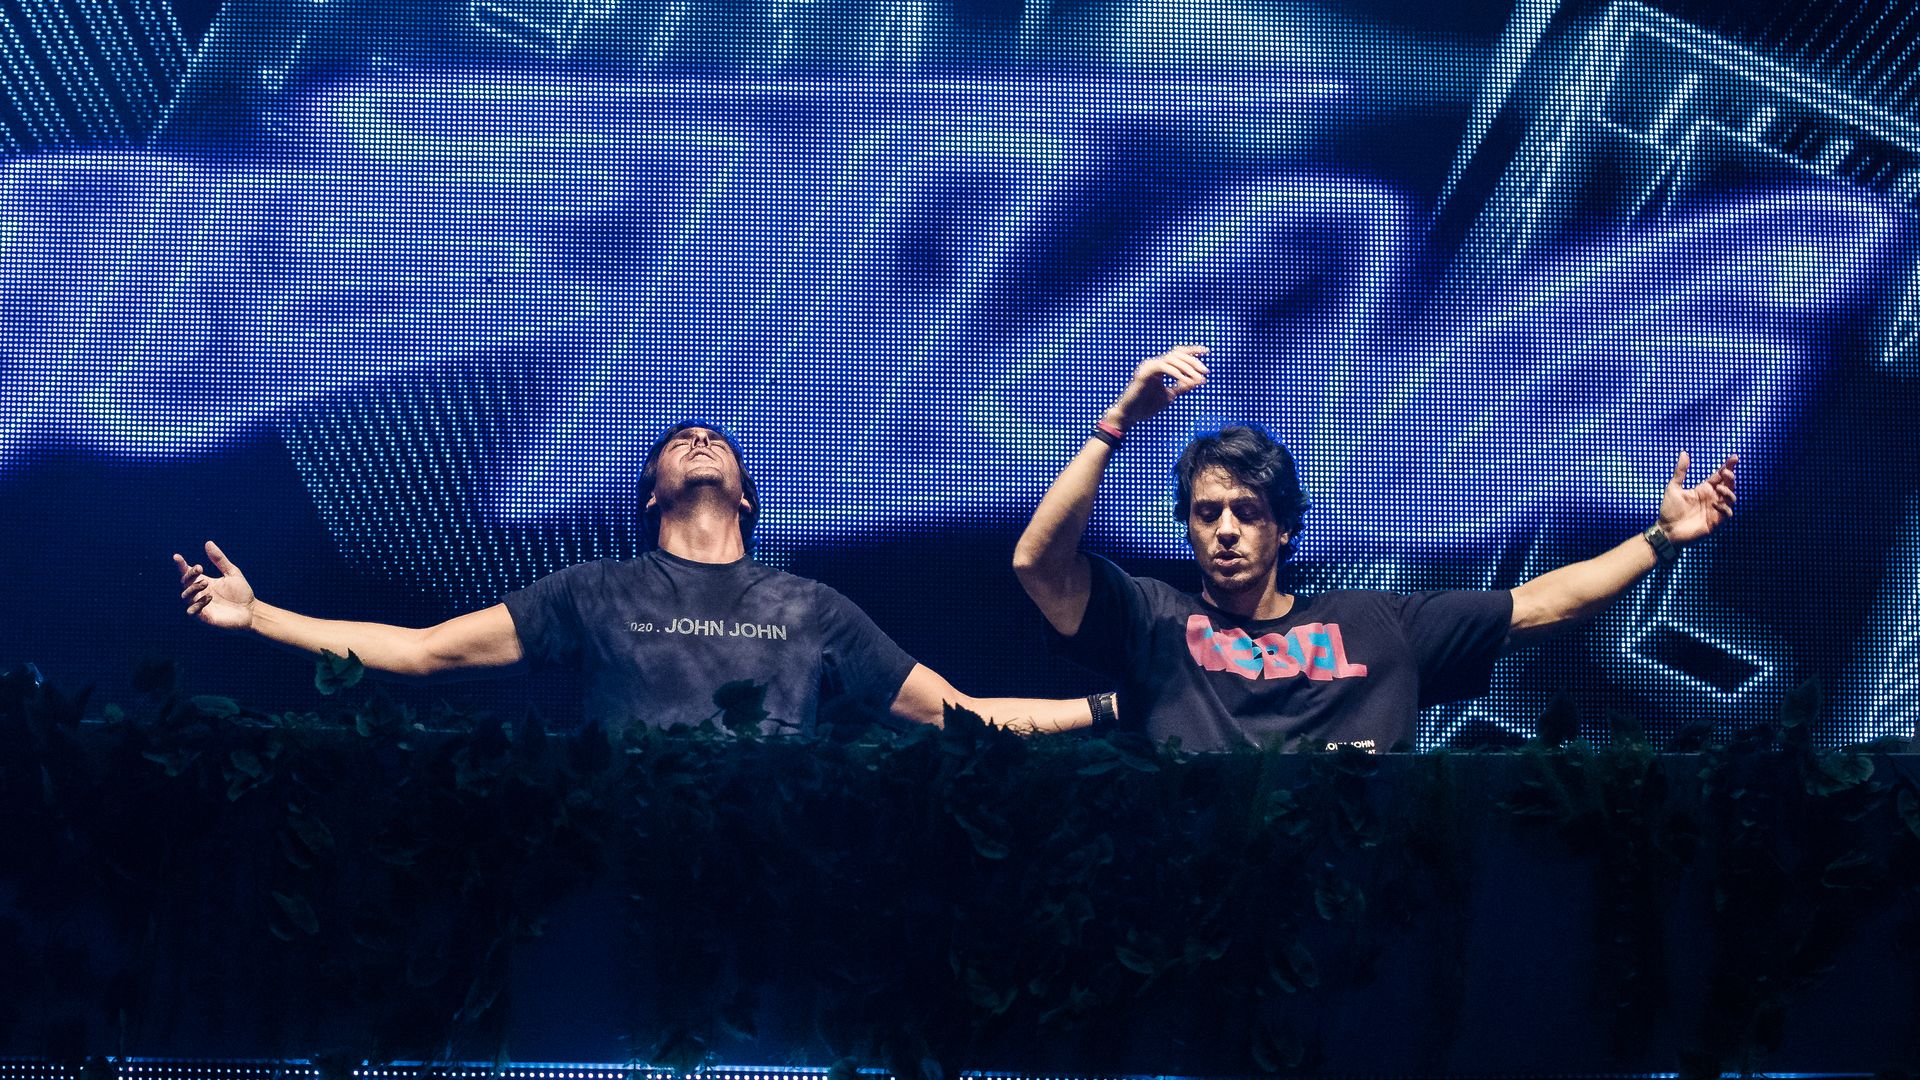 Two DJs performing on a stage